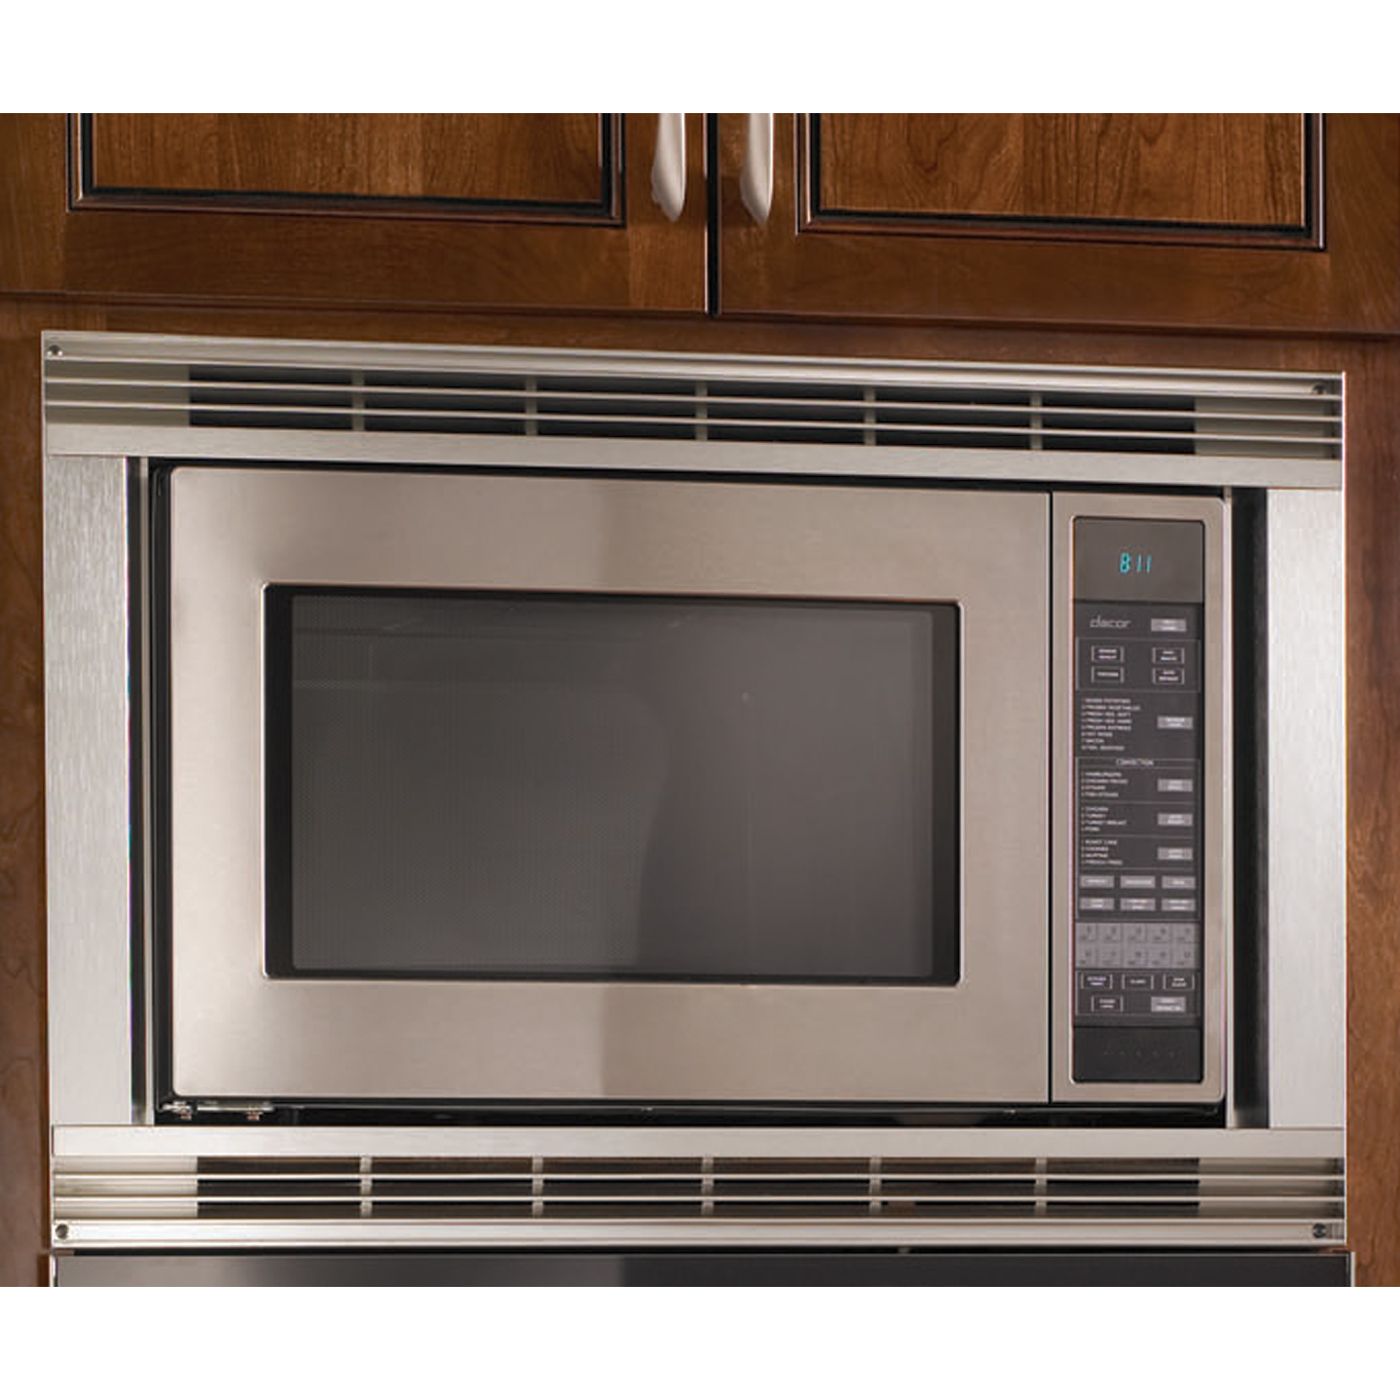 Dacor Discovery 1.5 cu. ft. Convection Microwave - Stainless Steel